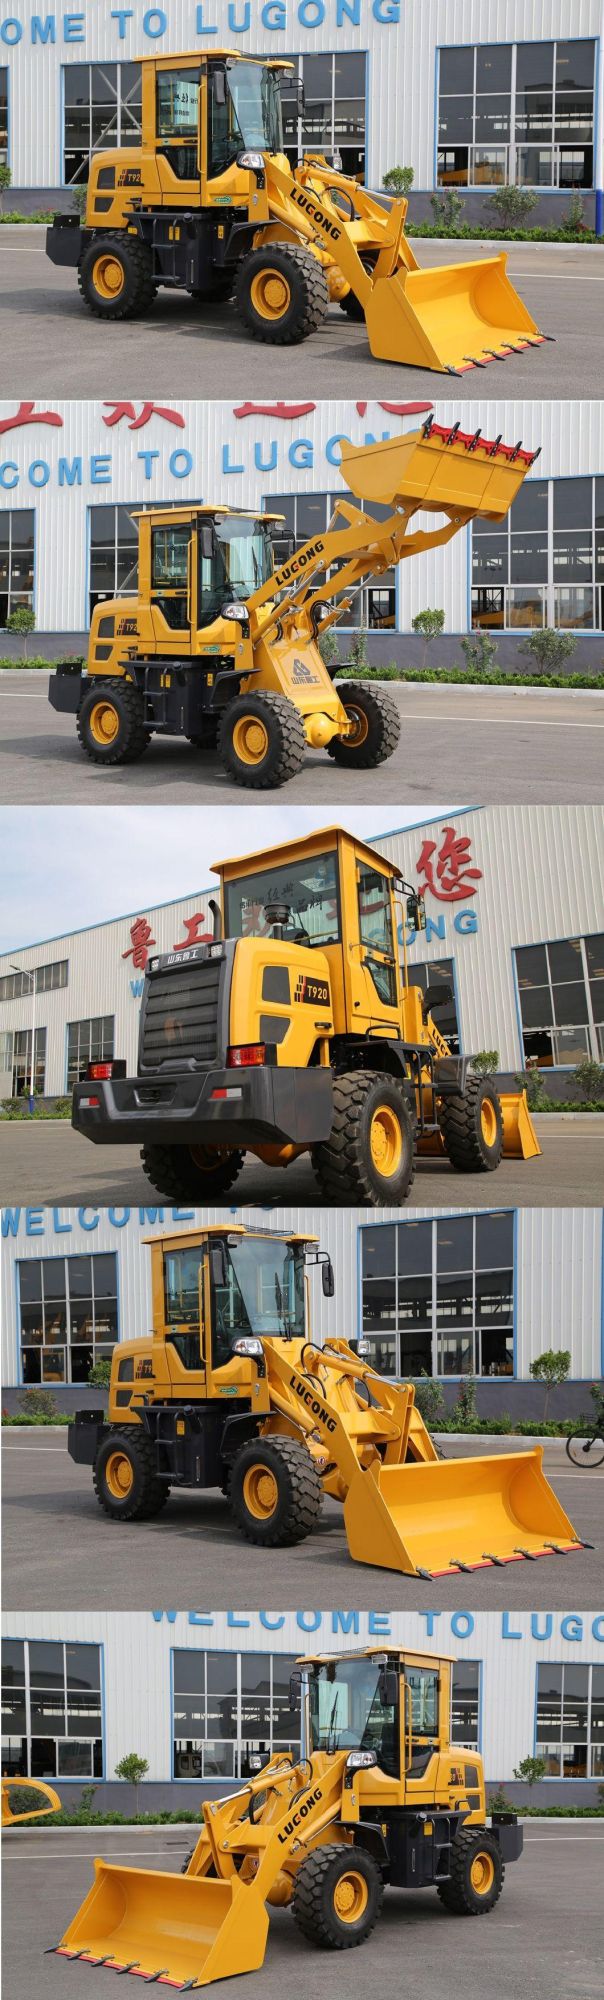 1.5 Ton Lugong Tractor Front Loader with Option for Livestock